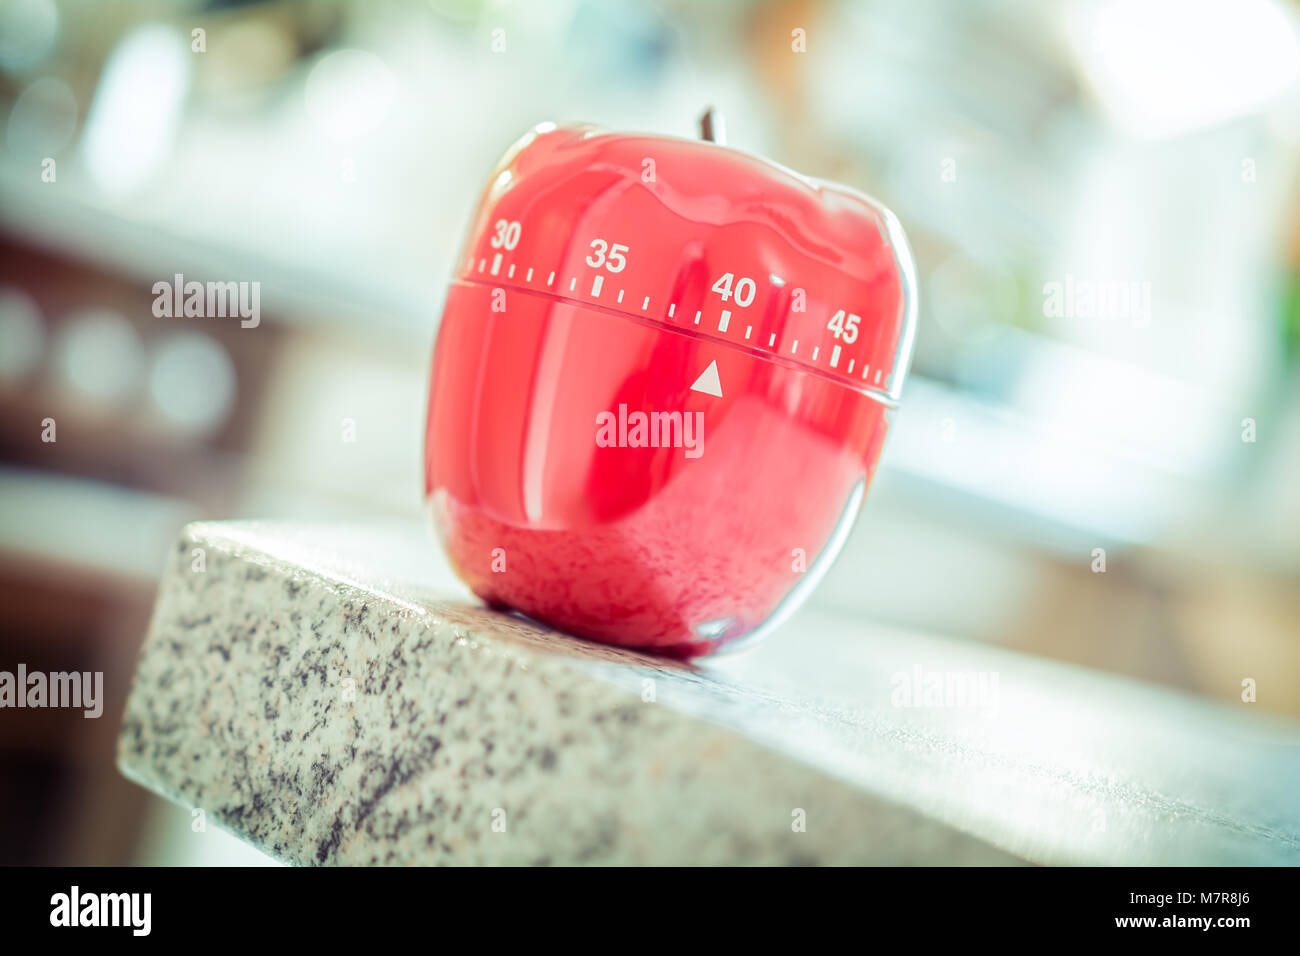 orientering Mangle konkurs 40 Minutes - Red Kitchen Egg Timer In Apple Shape Stock Photo - Alamy